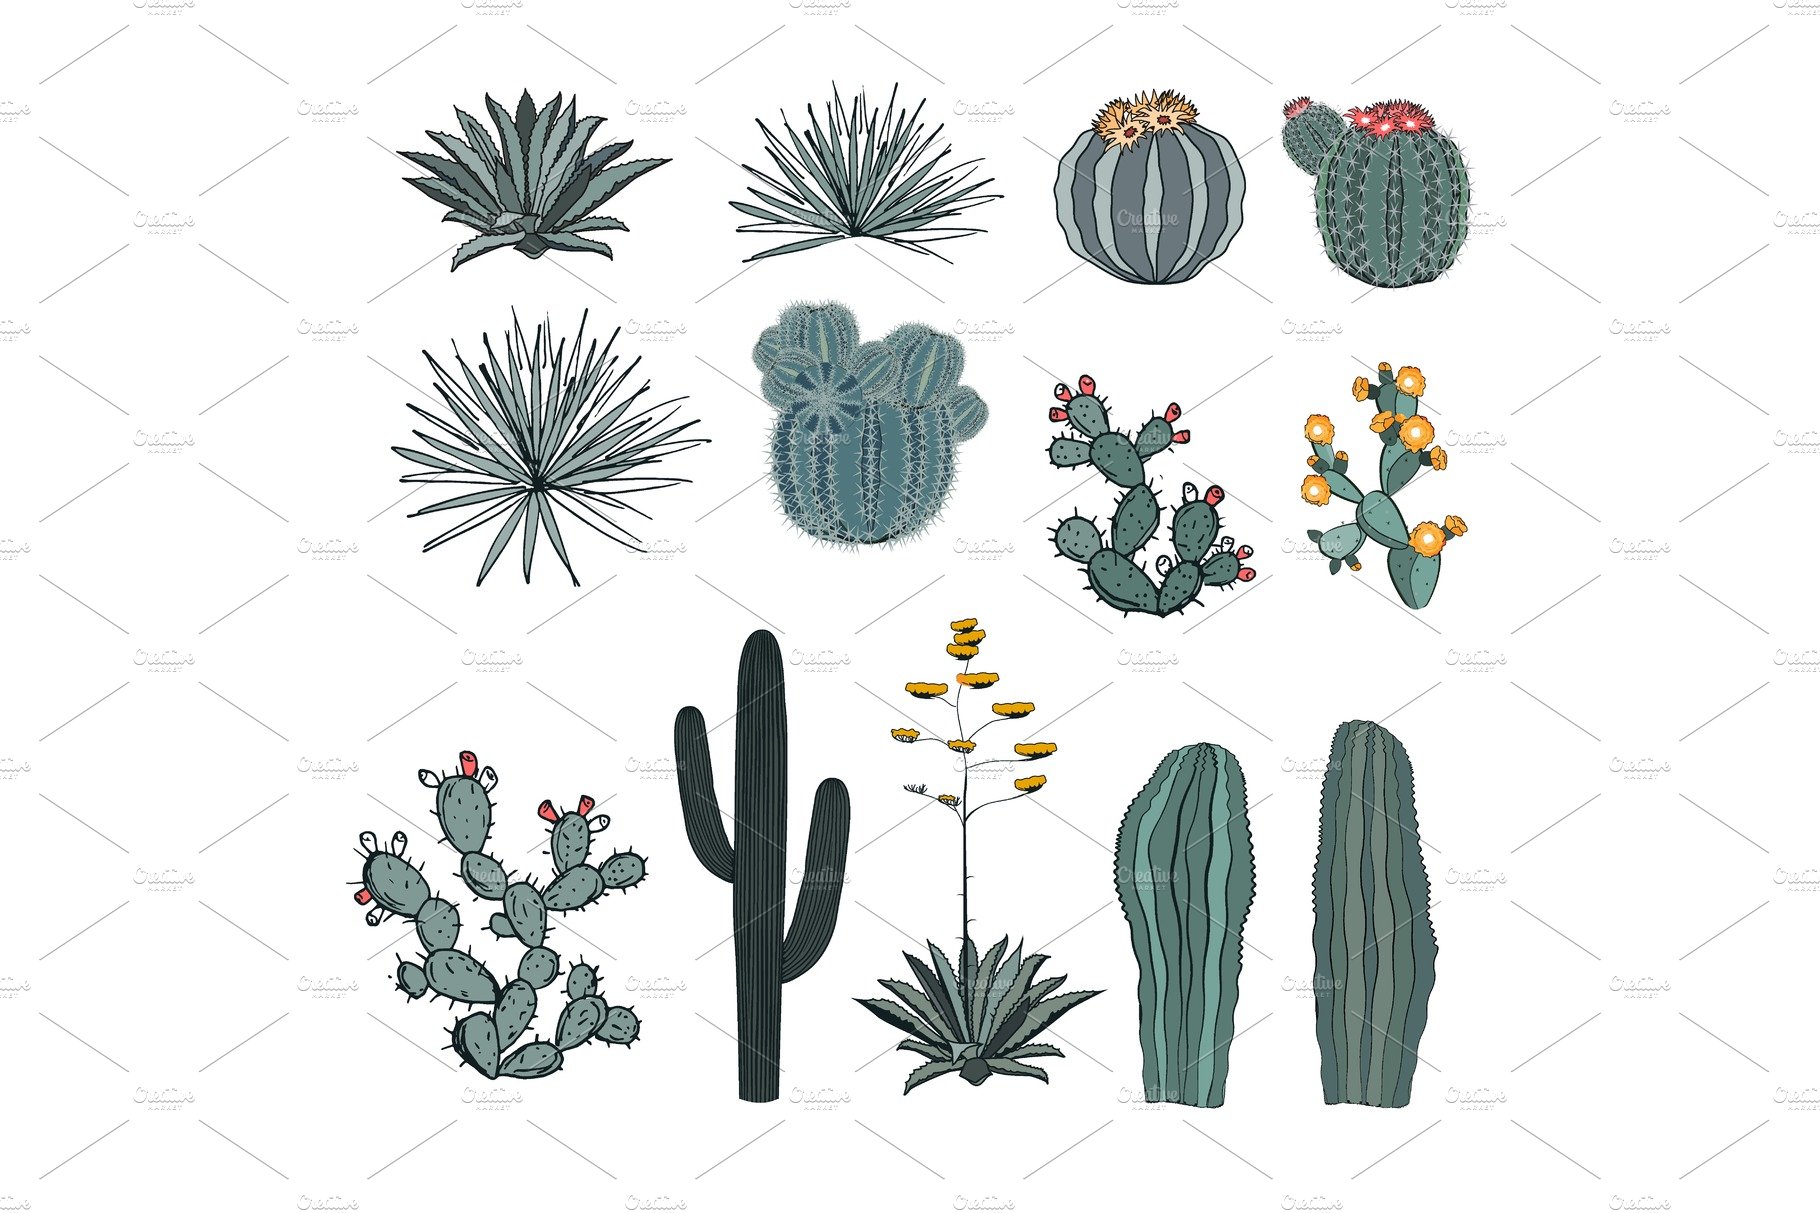 Variety of cactus plants on a white background.